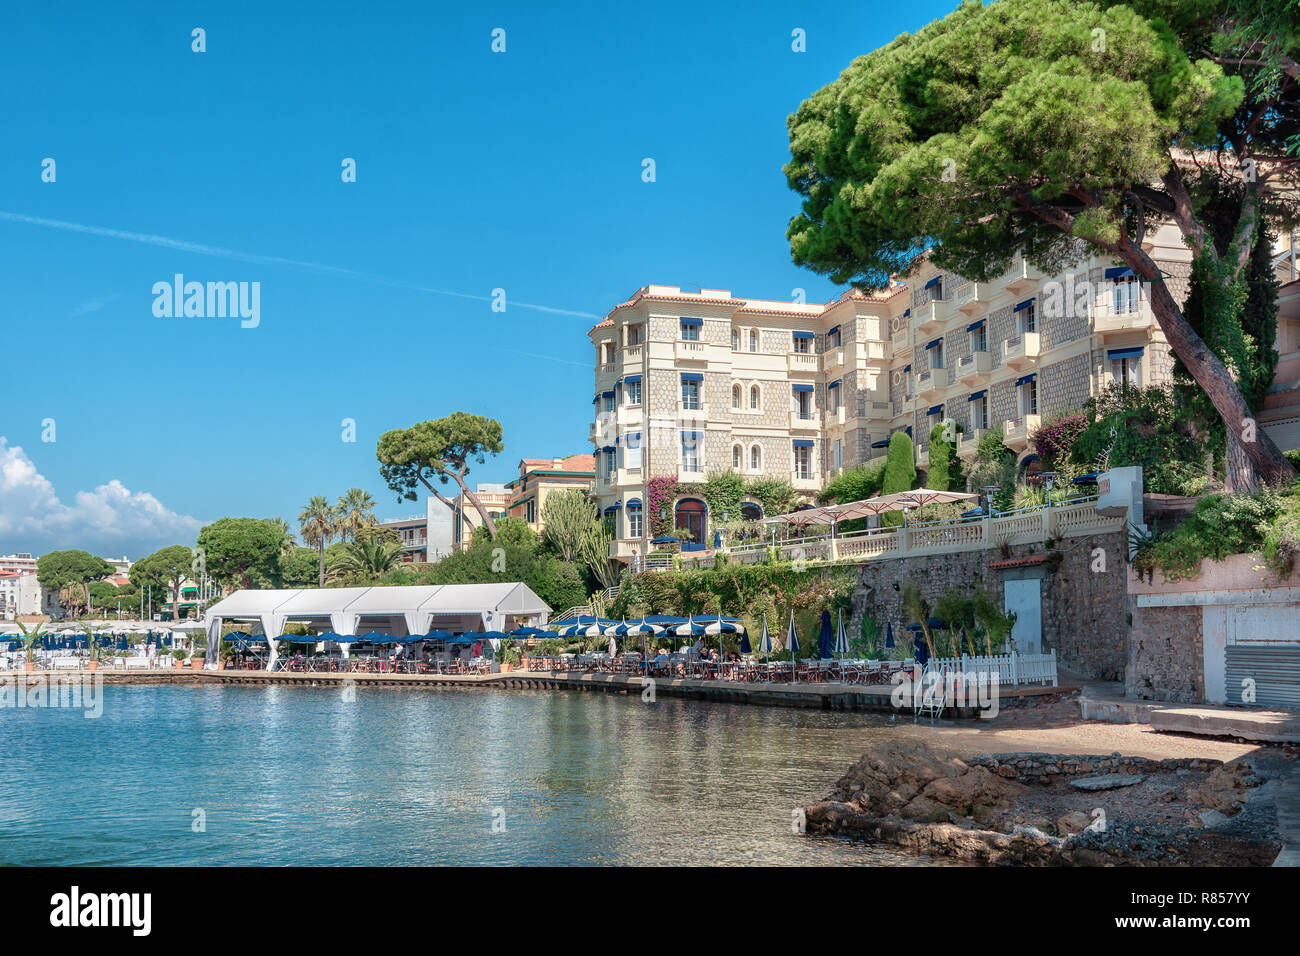 Cannes, France, September 15, 2018: The luxury hotel Belle Rives in the  beach resort Juan-les-Pins Stock Photo - Alamy